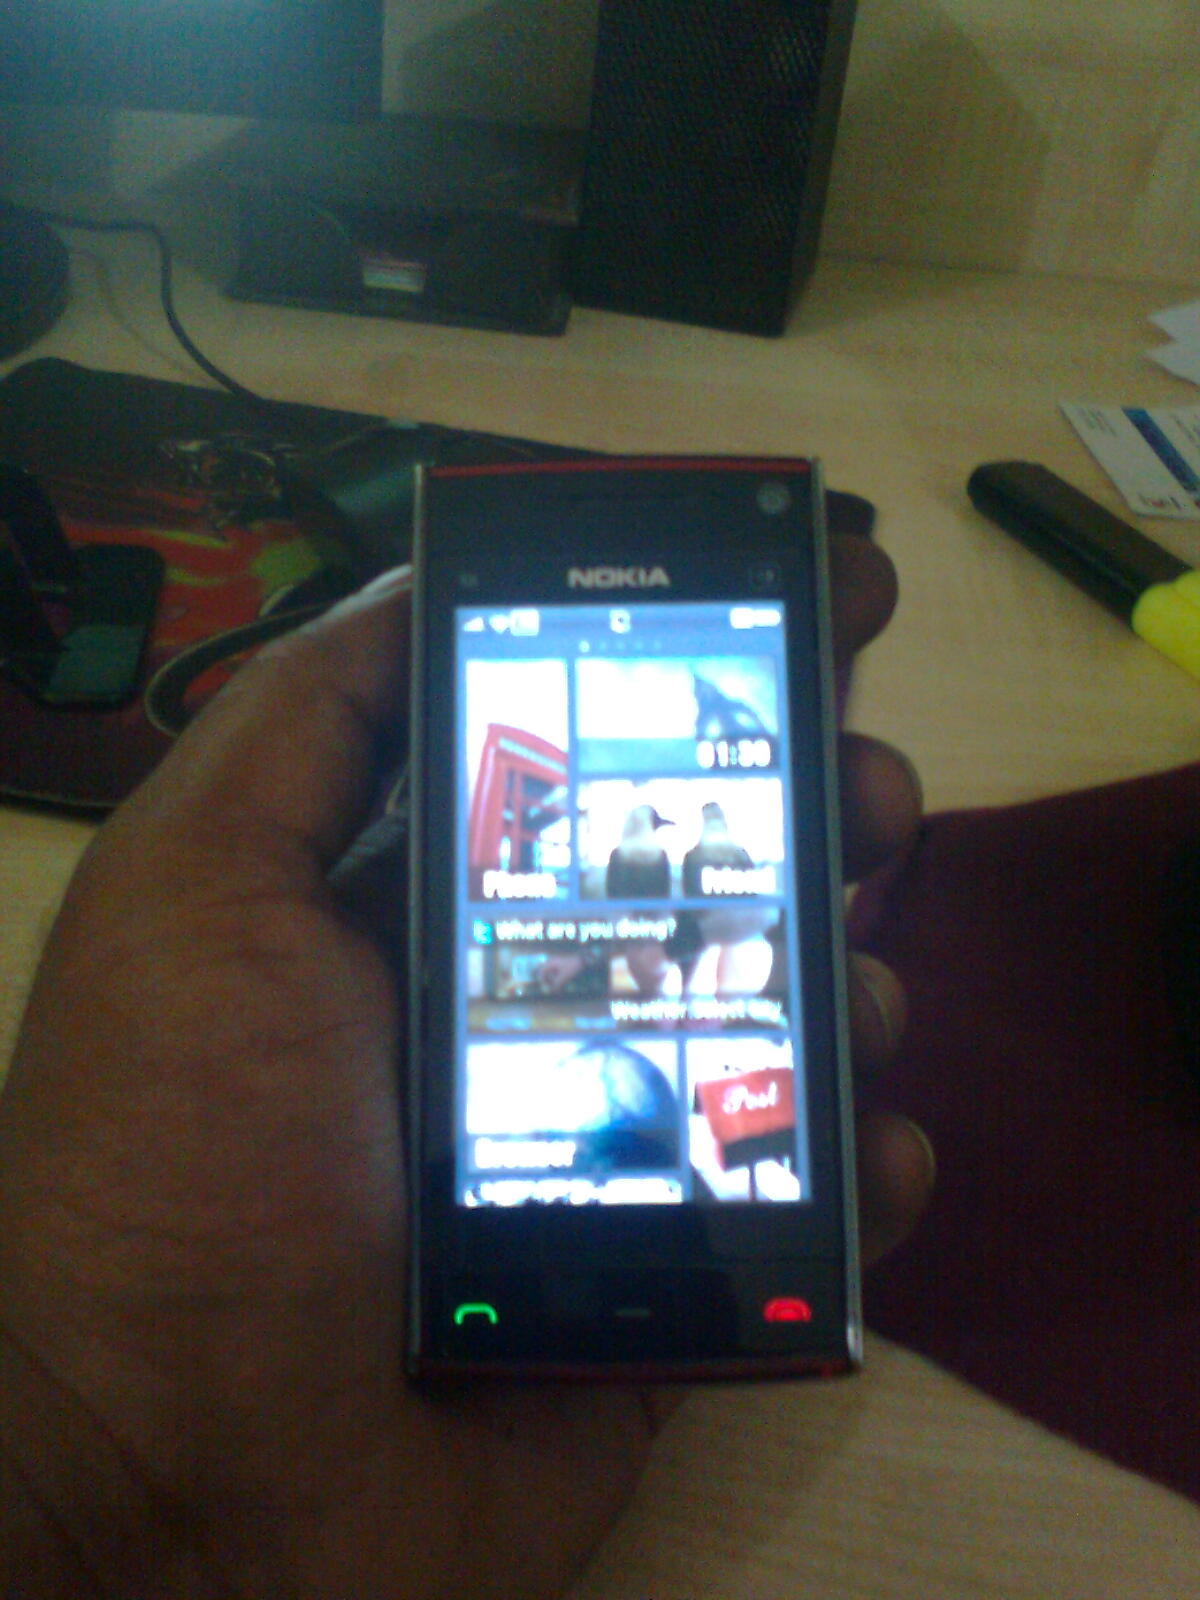 Nokia X6 00 32 GB 100 fully fresh with everything in box. large image 1